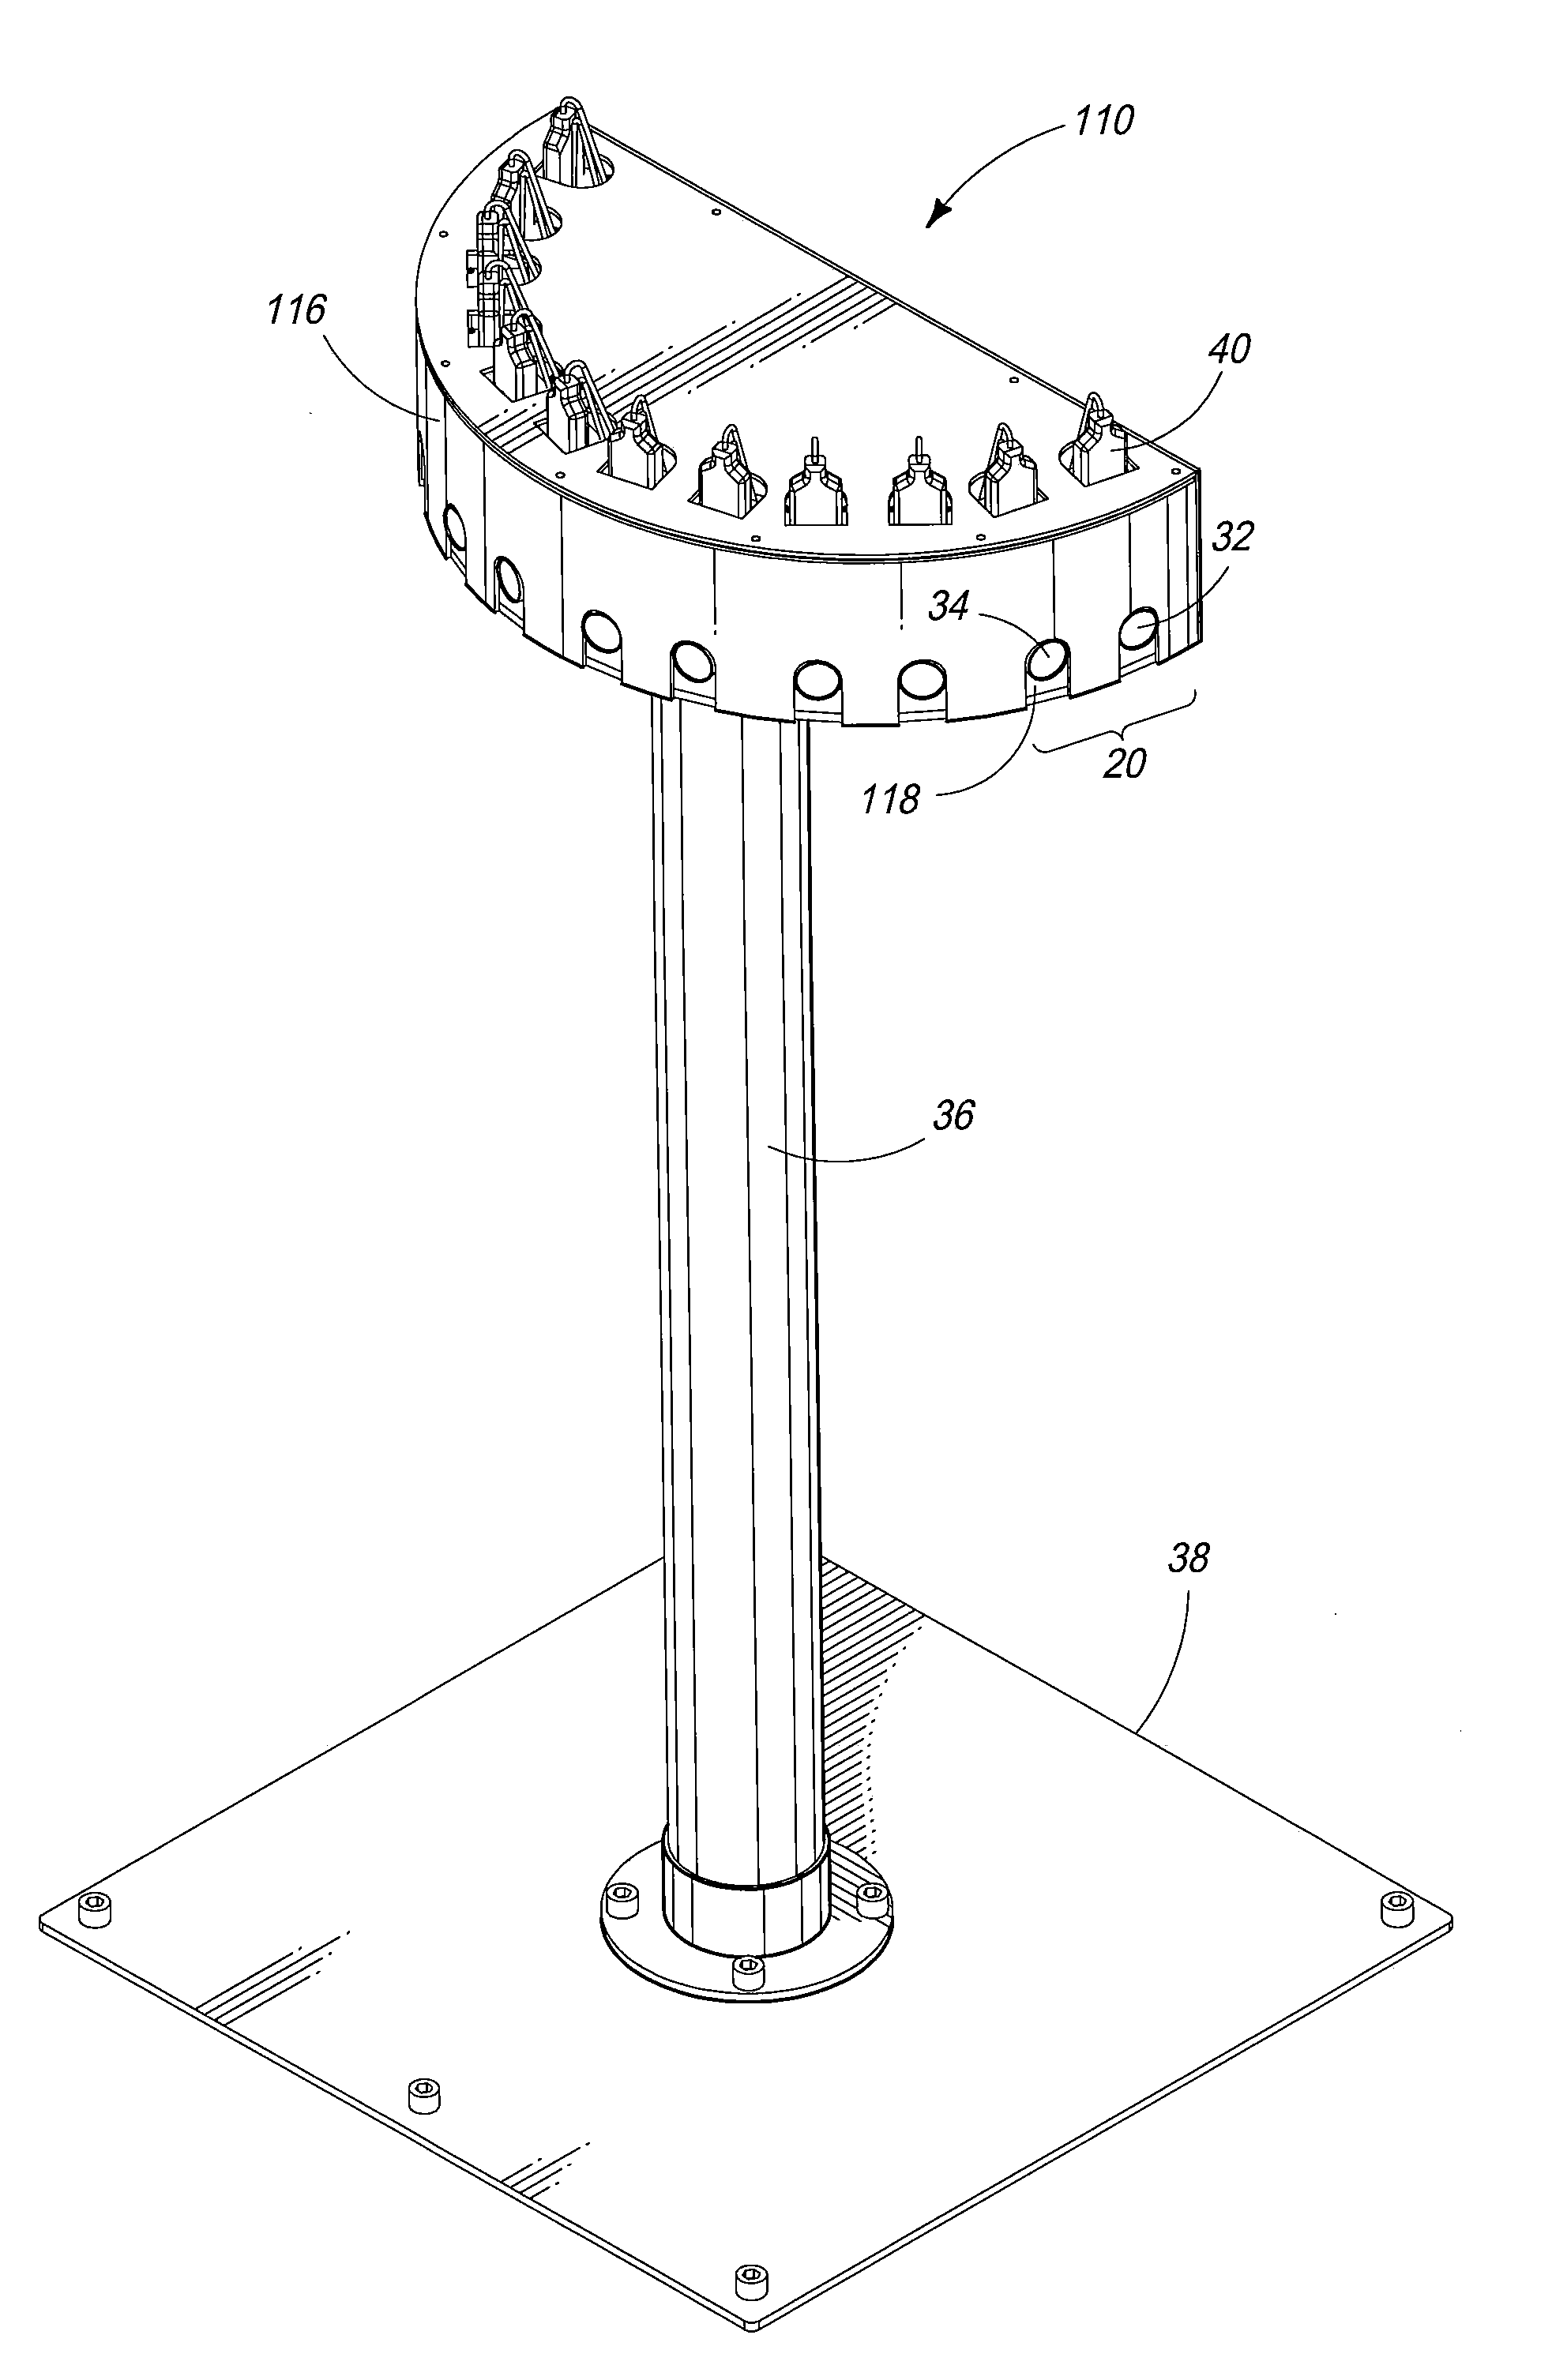 Apparatus and Method for Capturing Images